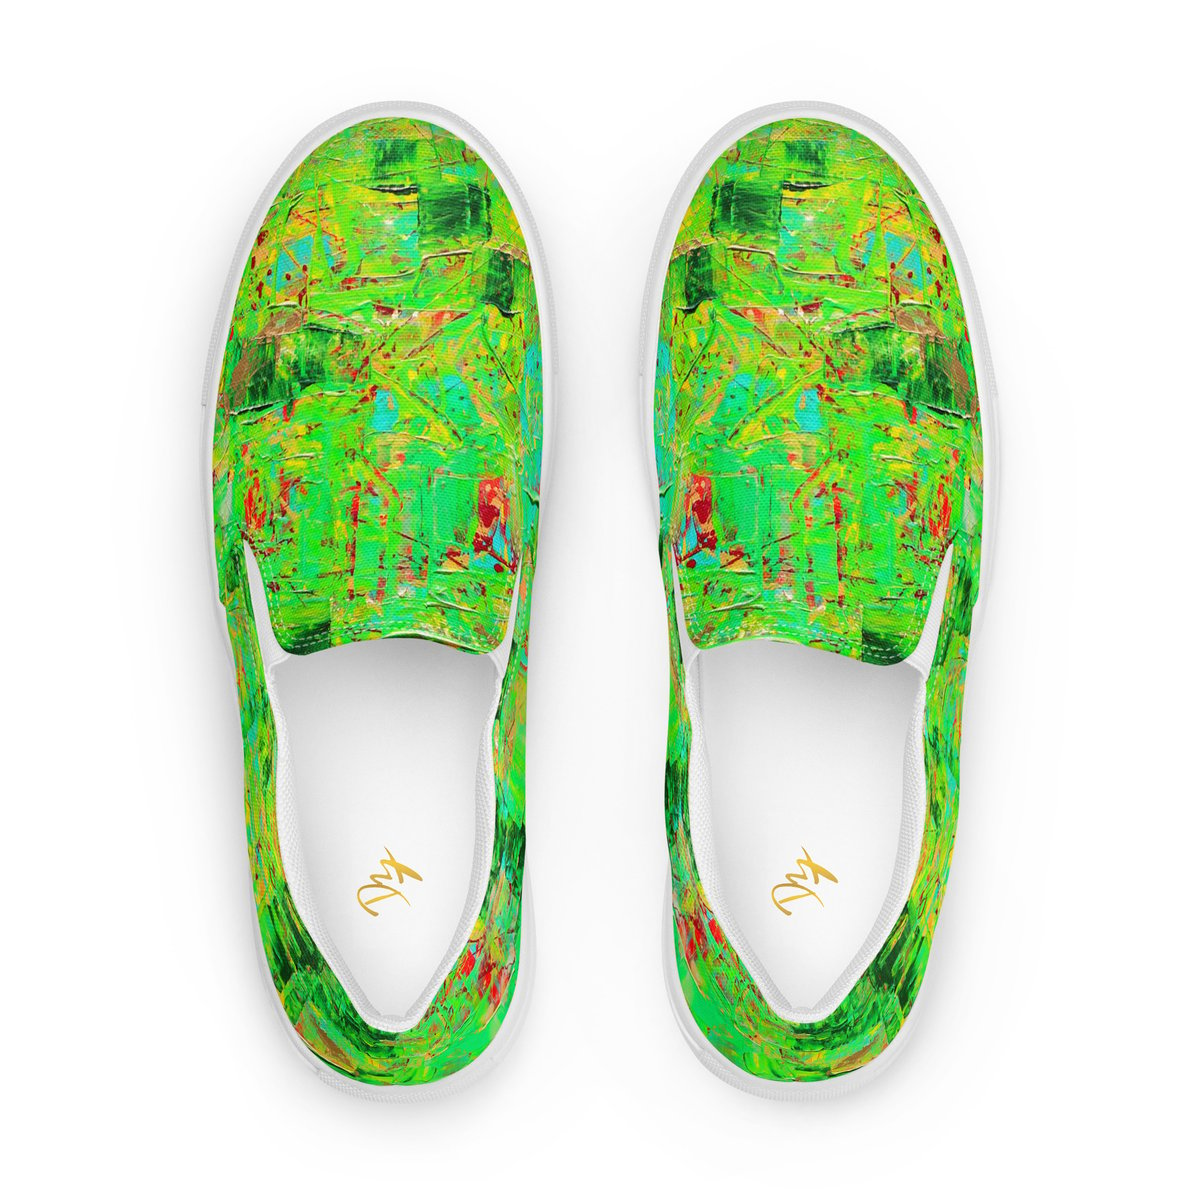 Image of "Moss" Men’s slip-on canvas shoes 